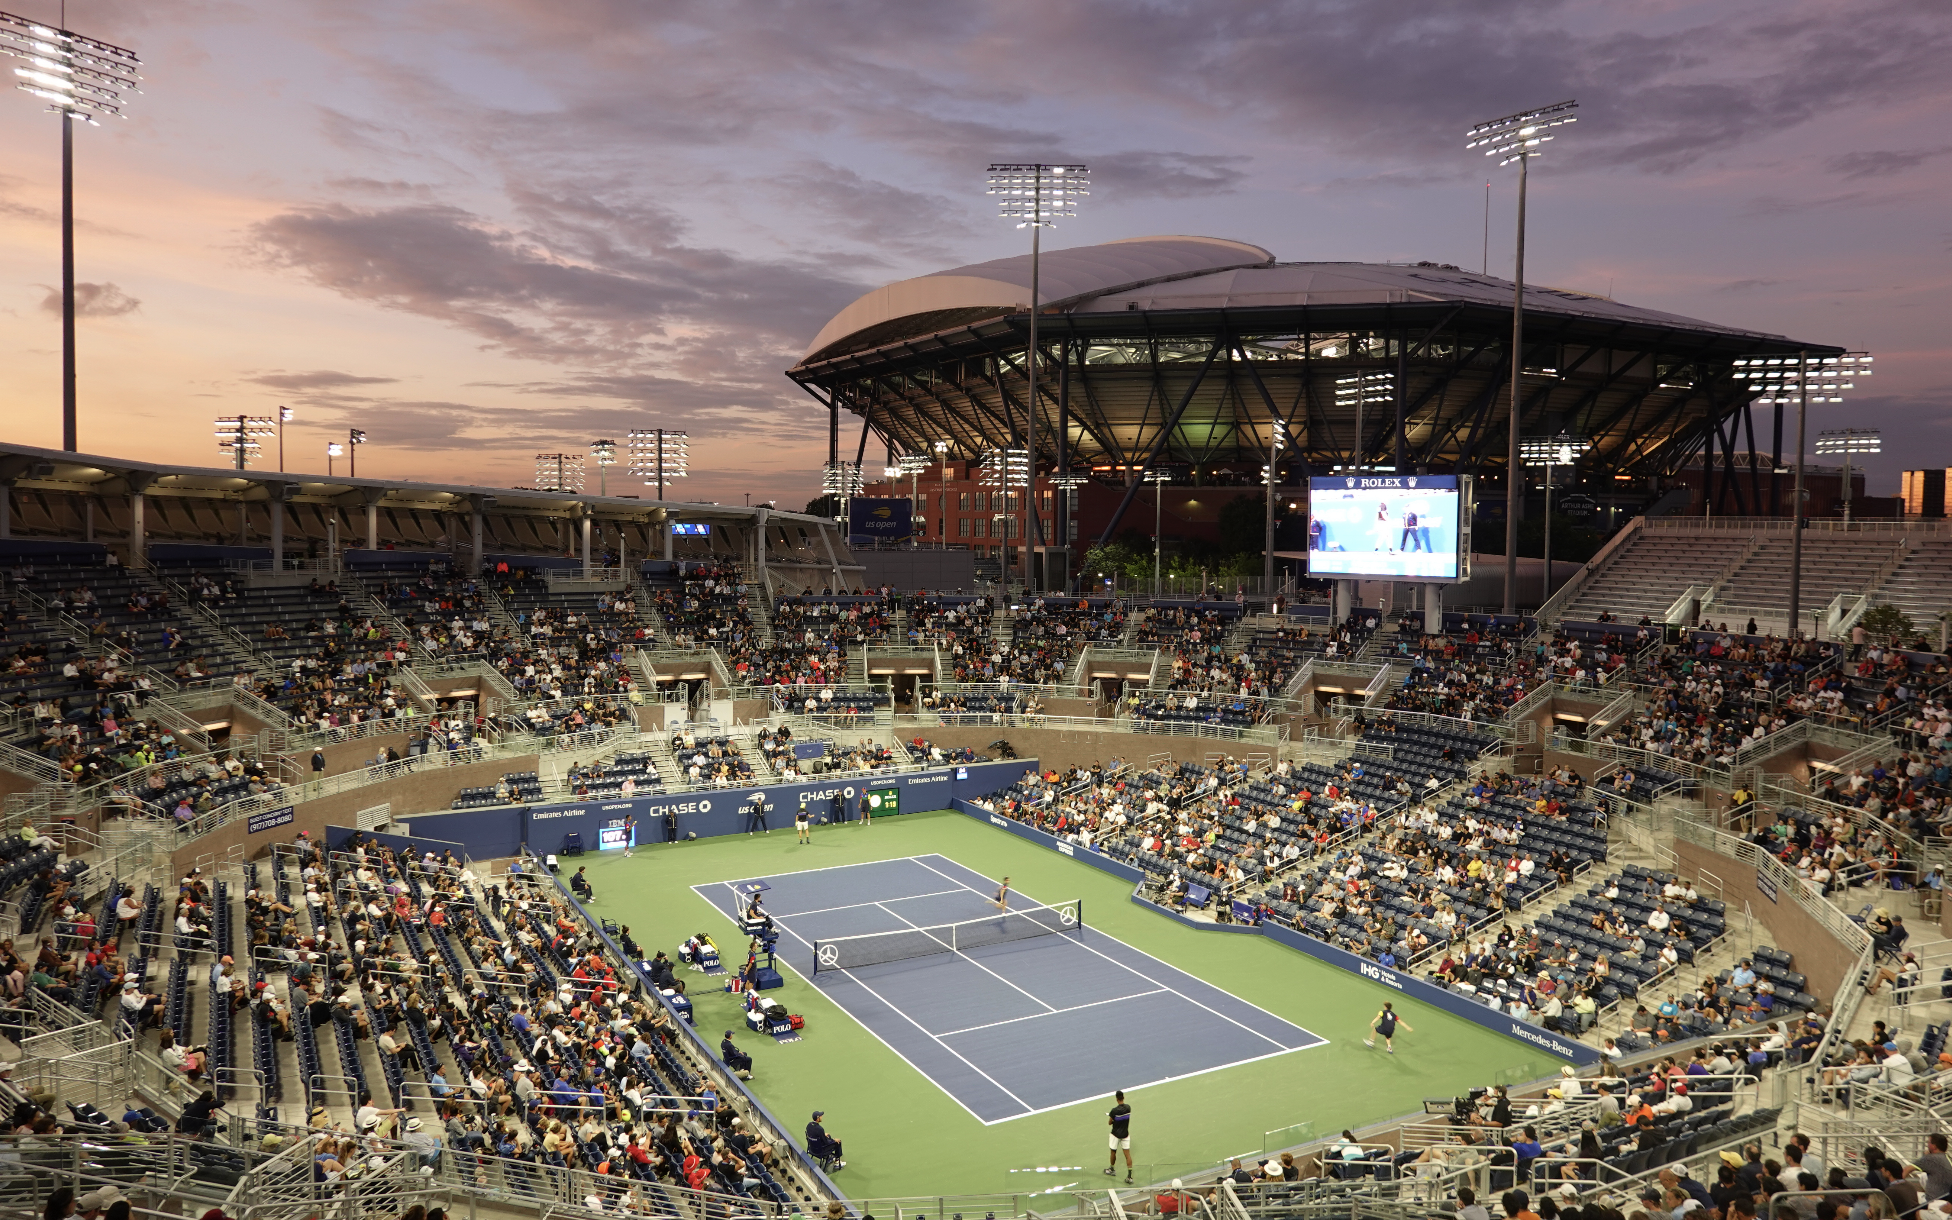 Watch some of the best players in the world play tennis at the U.S. Open for free